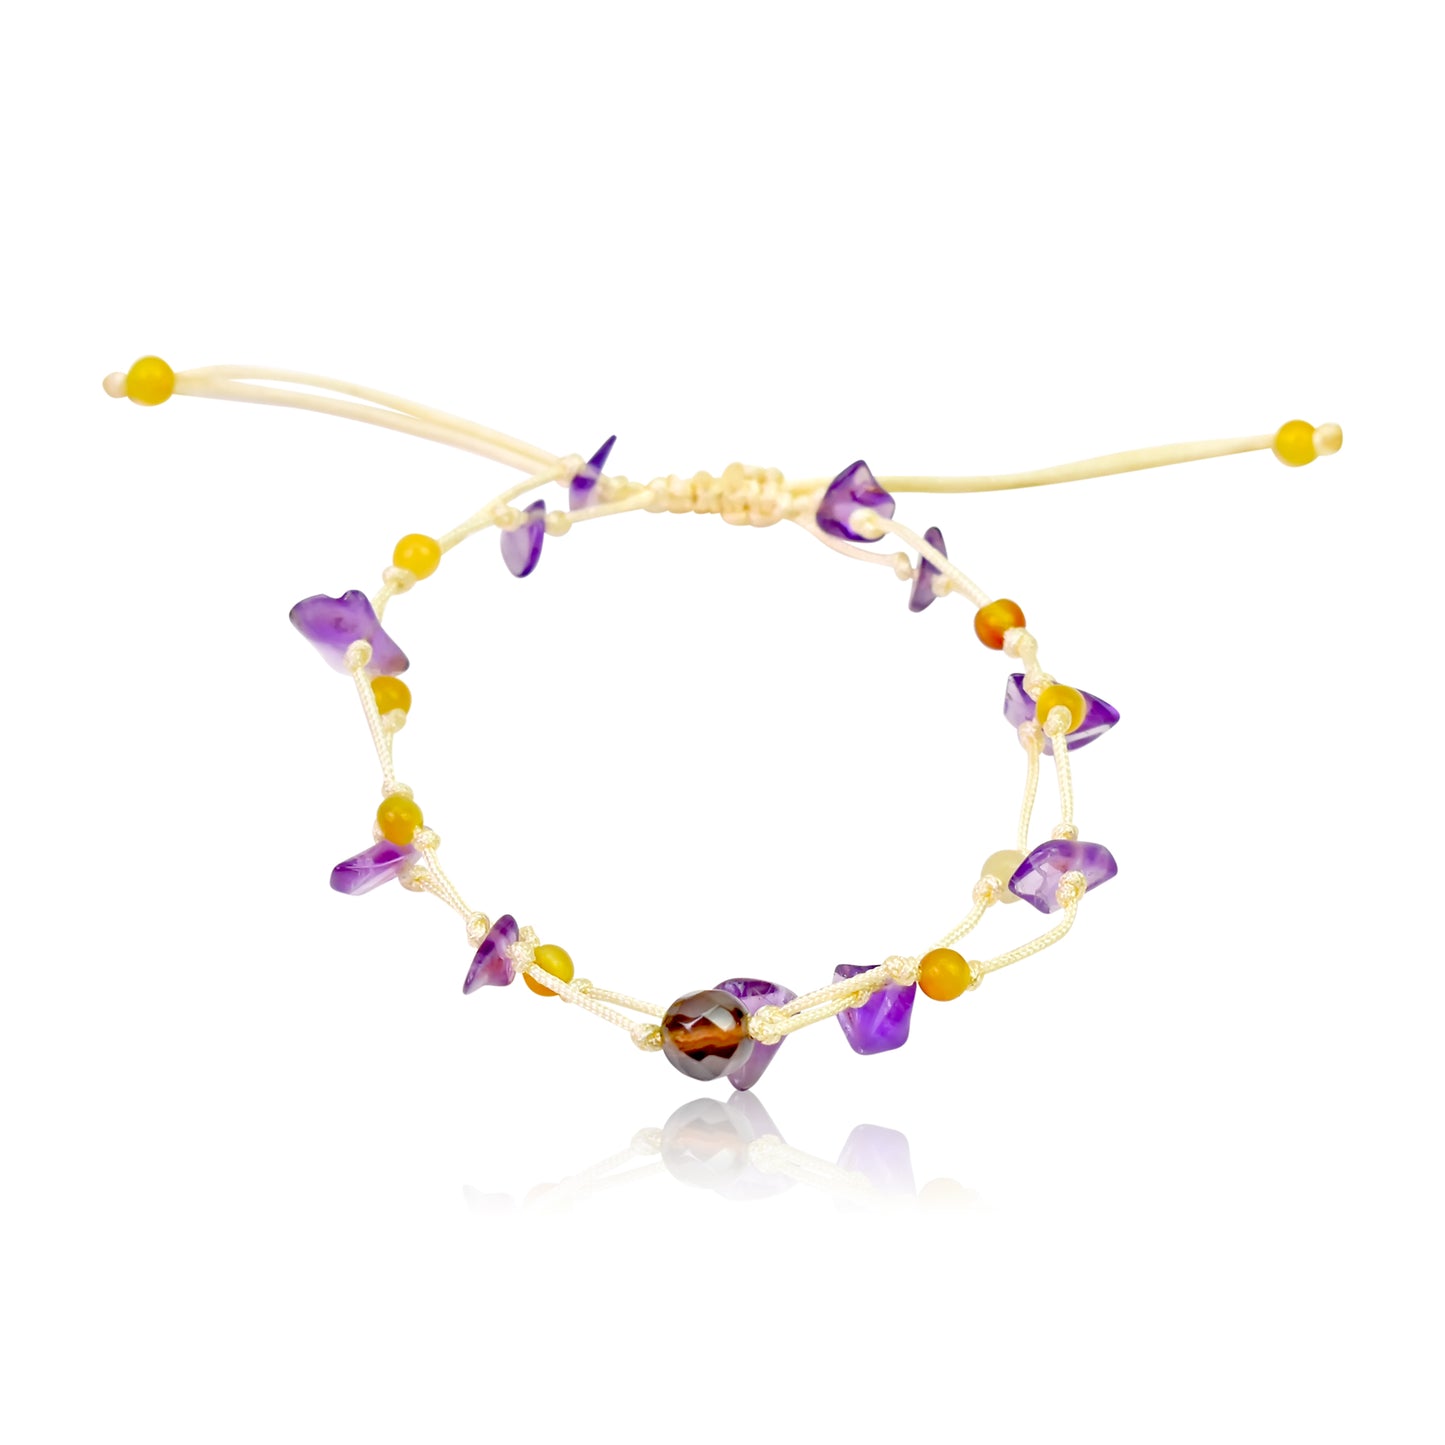 The Perfect Jewelry Piece for Any Occasion: Amethyst, Onyx, Bracelet